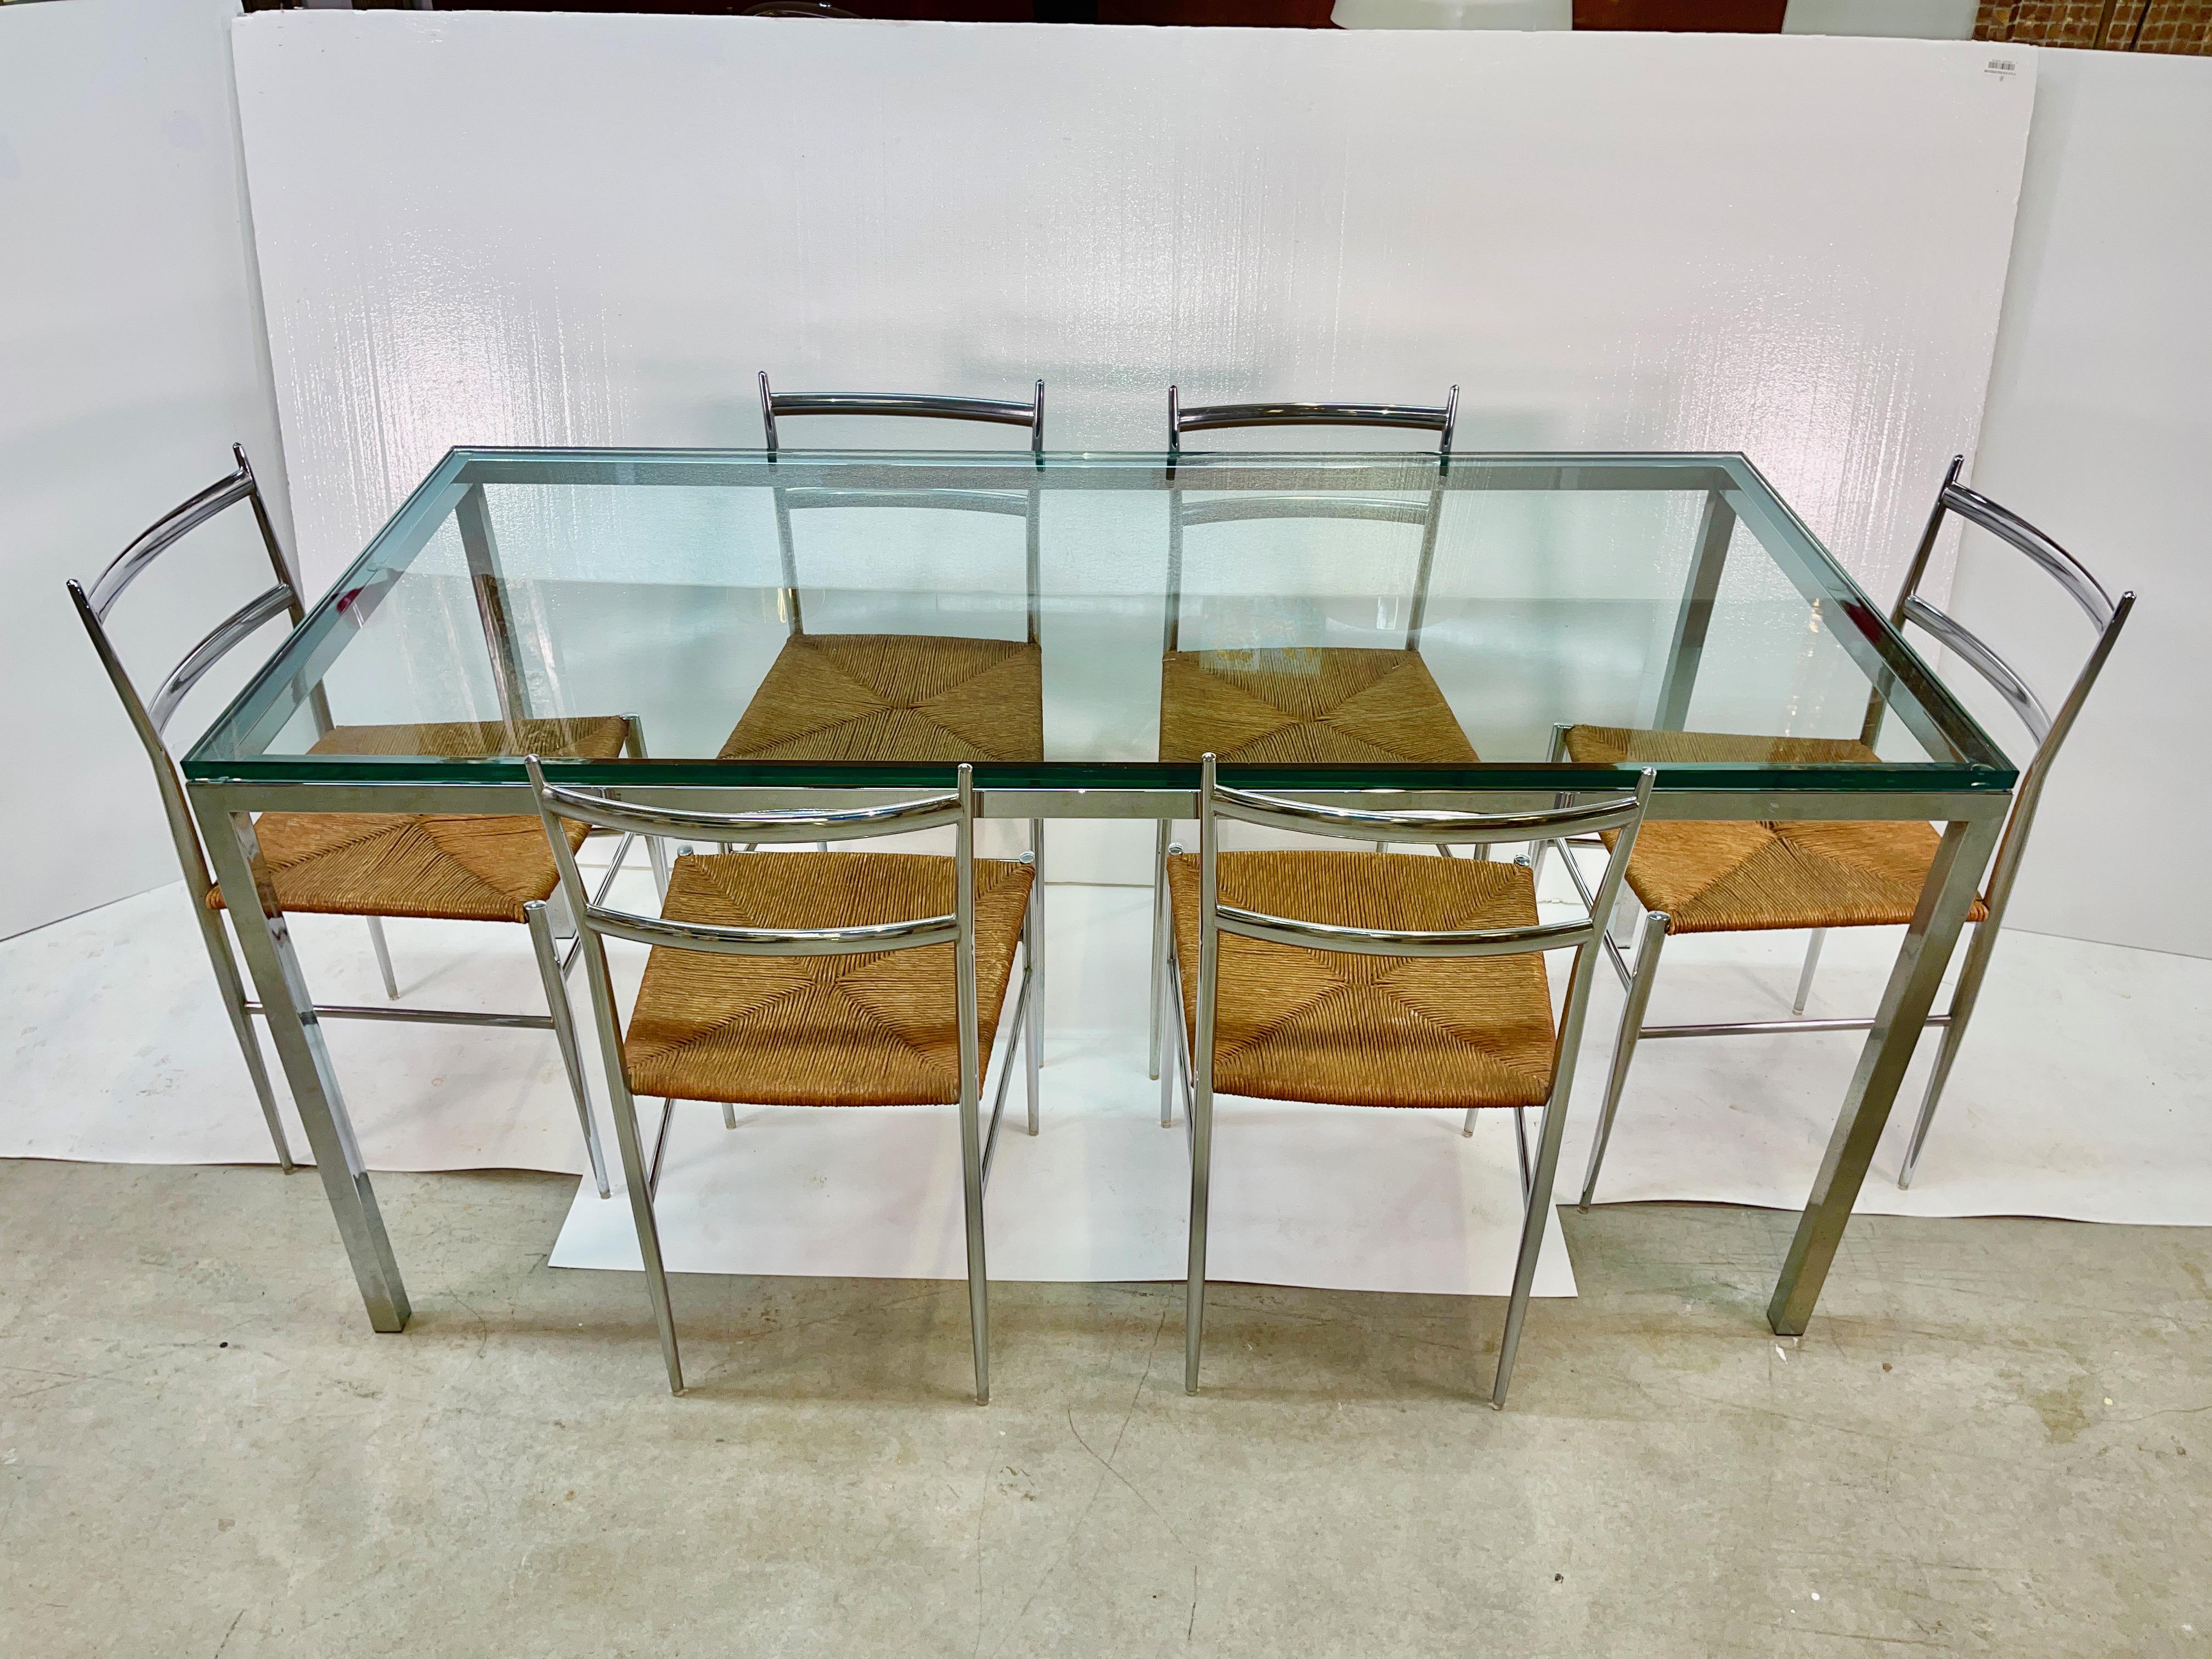 1970's chrome-a-licious dining table and chairs imported from Italy.
This slim dining table is of minimalist rectangular form and made of chromed steel square tube.
The 3/4 inch thick glass top rests flush to the edge with no overhang. Flat